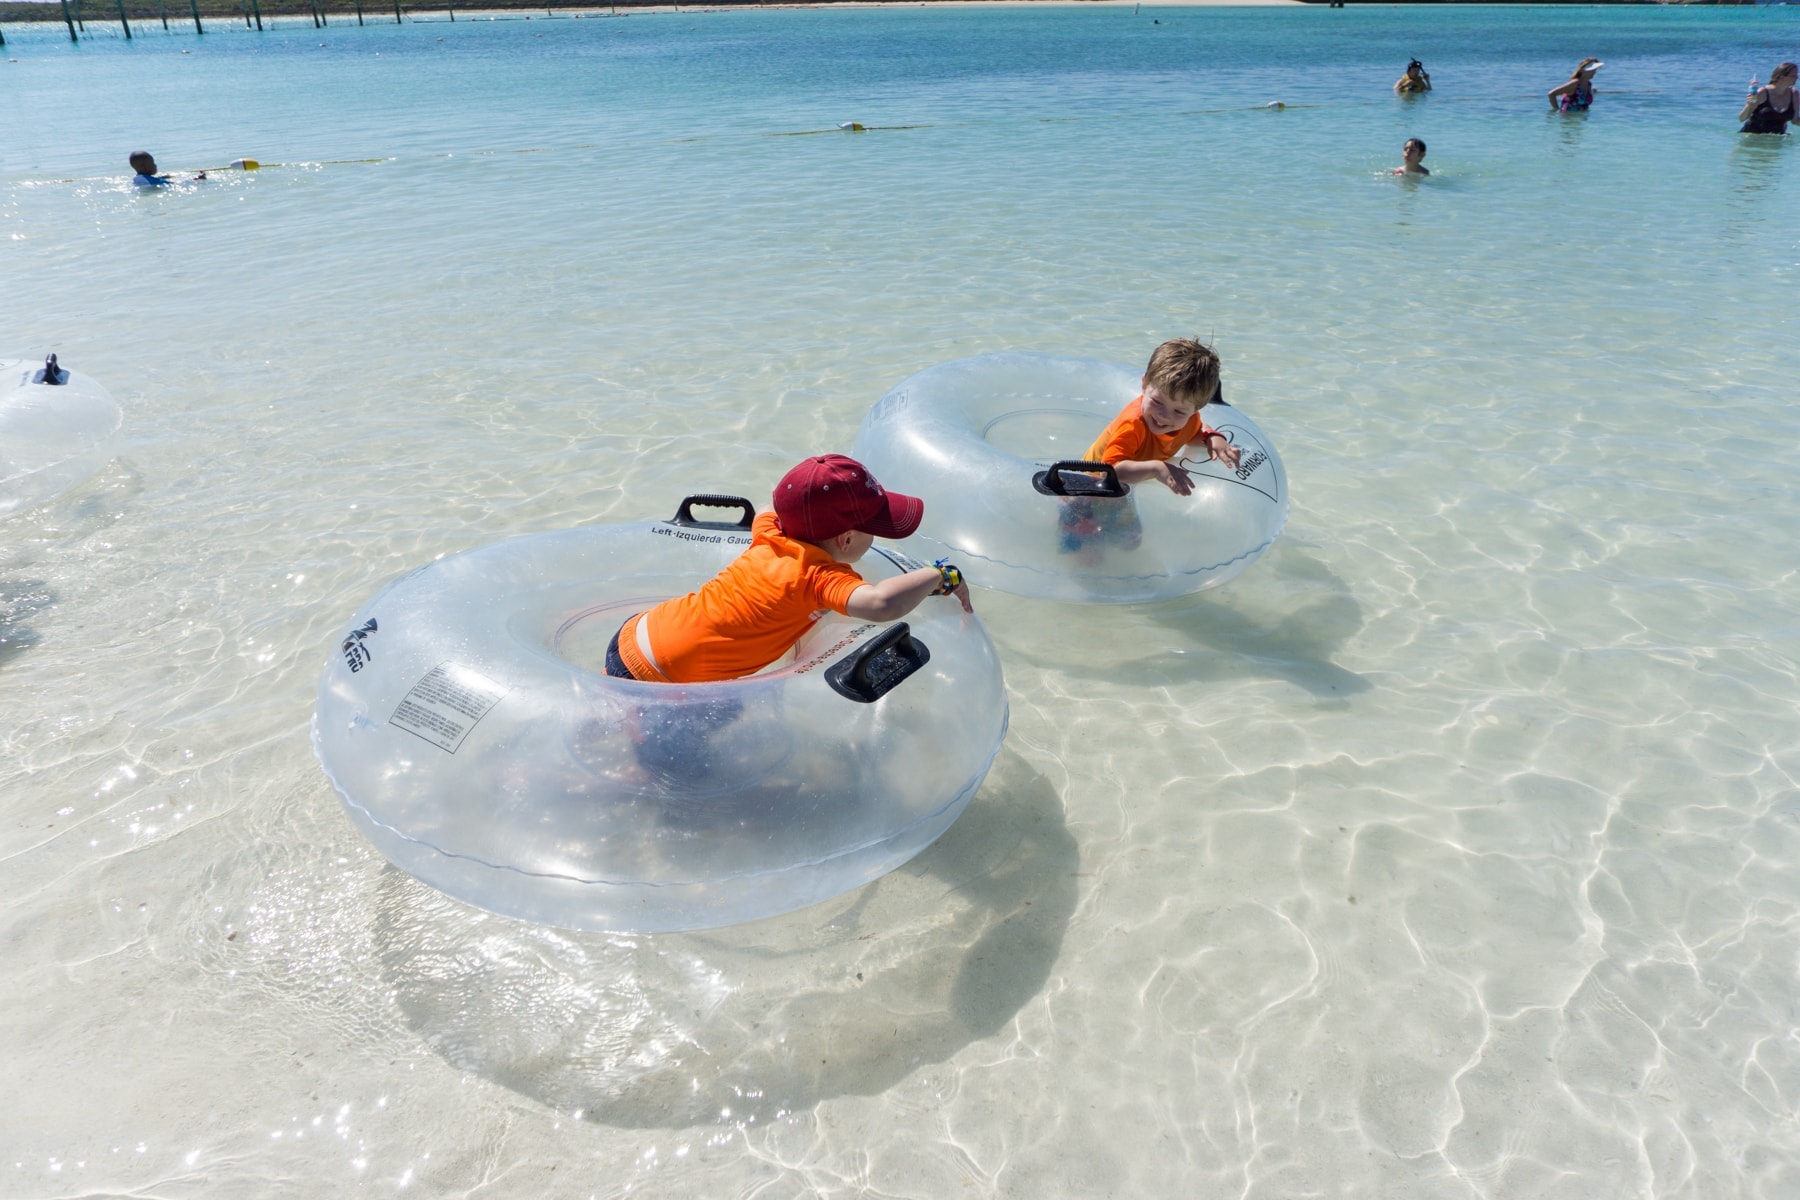 Blake and Eddie in the water with inflatable tubes